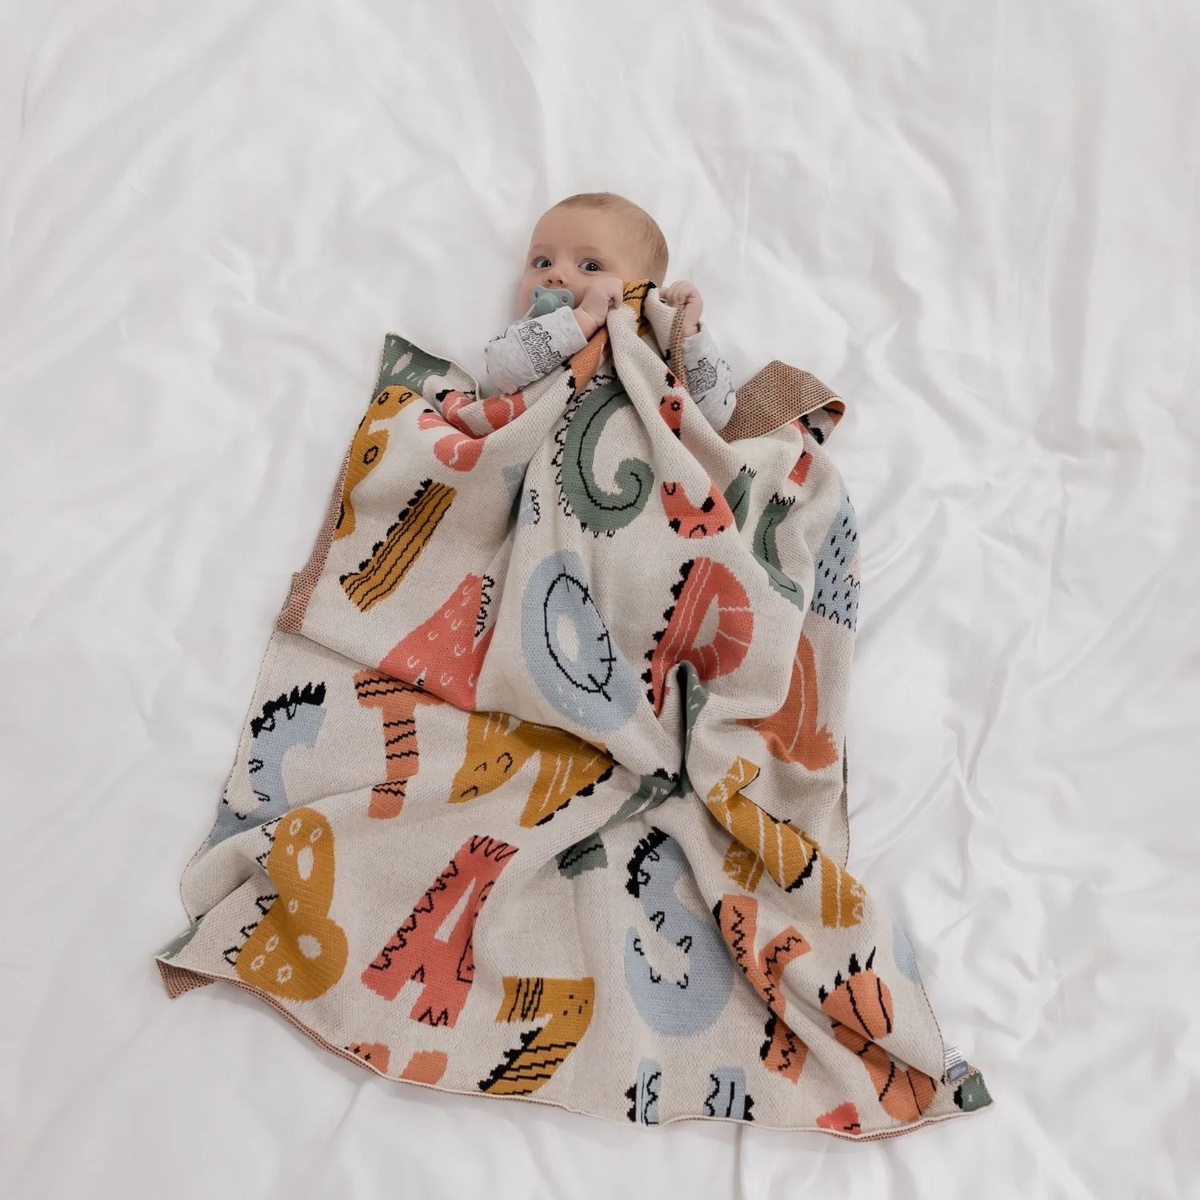 Cosy Baby Blankets: Find the Perfect One Online